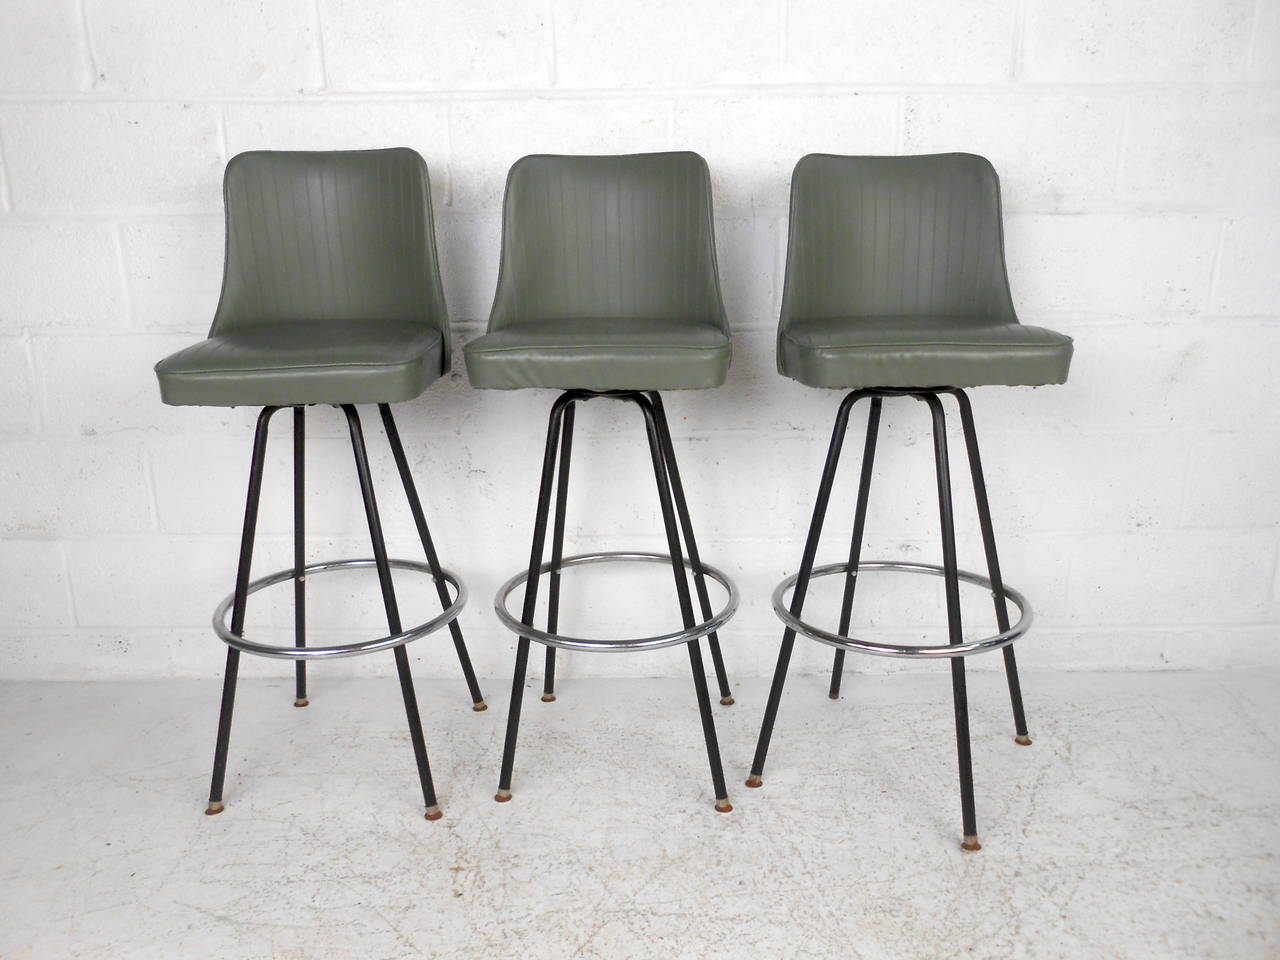 This set of three mid century bar stools by Atlas Specialty Manufacturing feature a green vinyl upholstery, swivel base, and chrome foot rest.

Please confirm item location (NY or NJ) with the dealer.